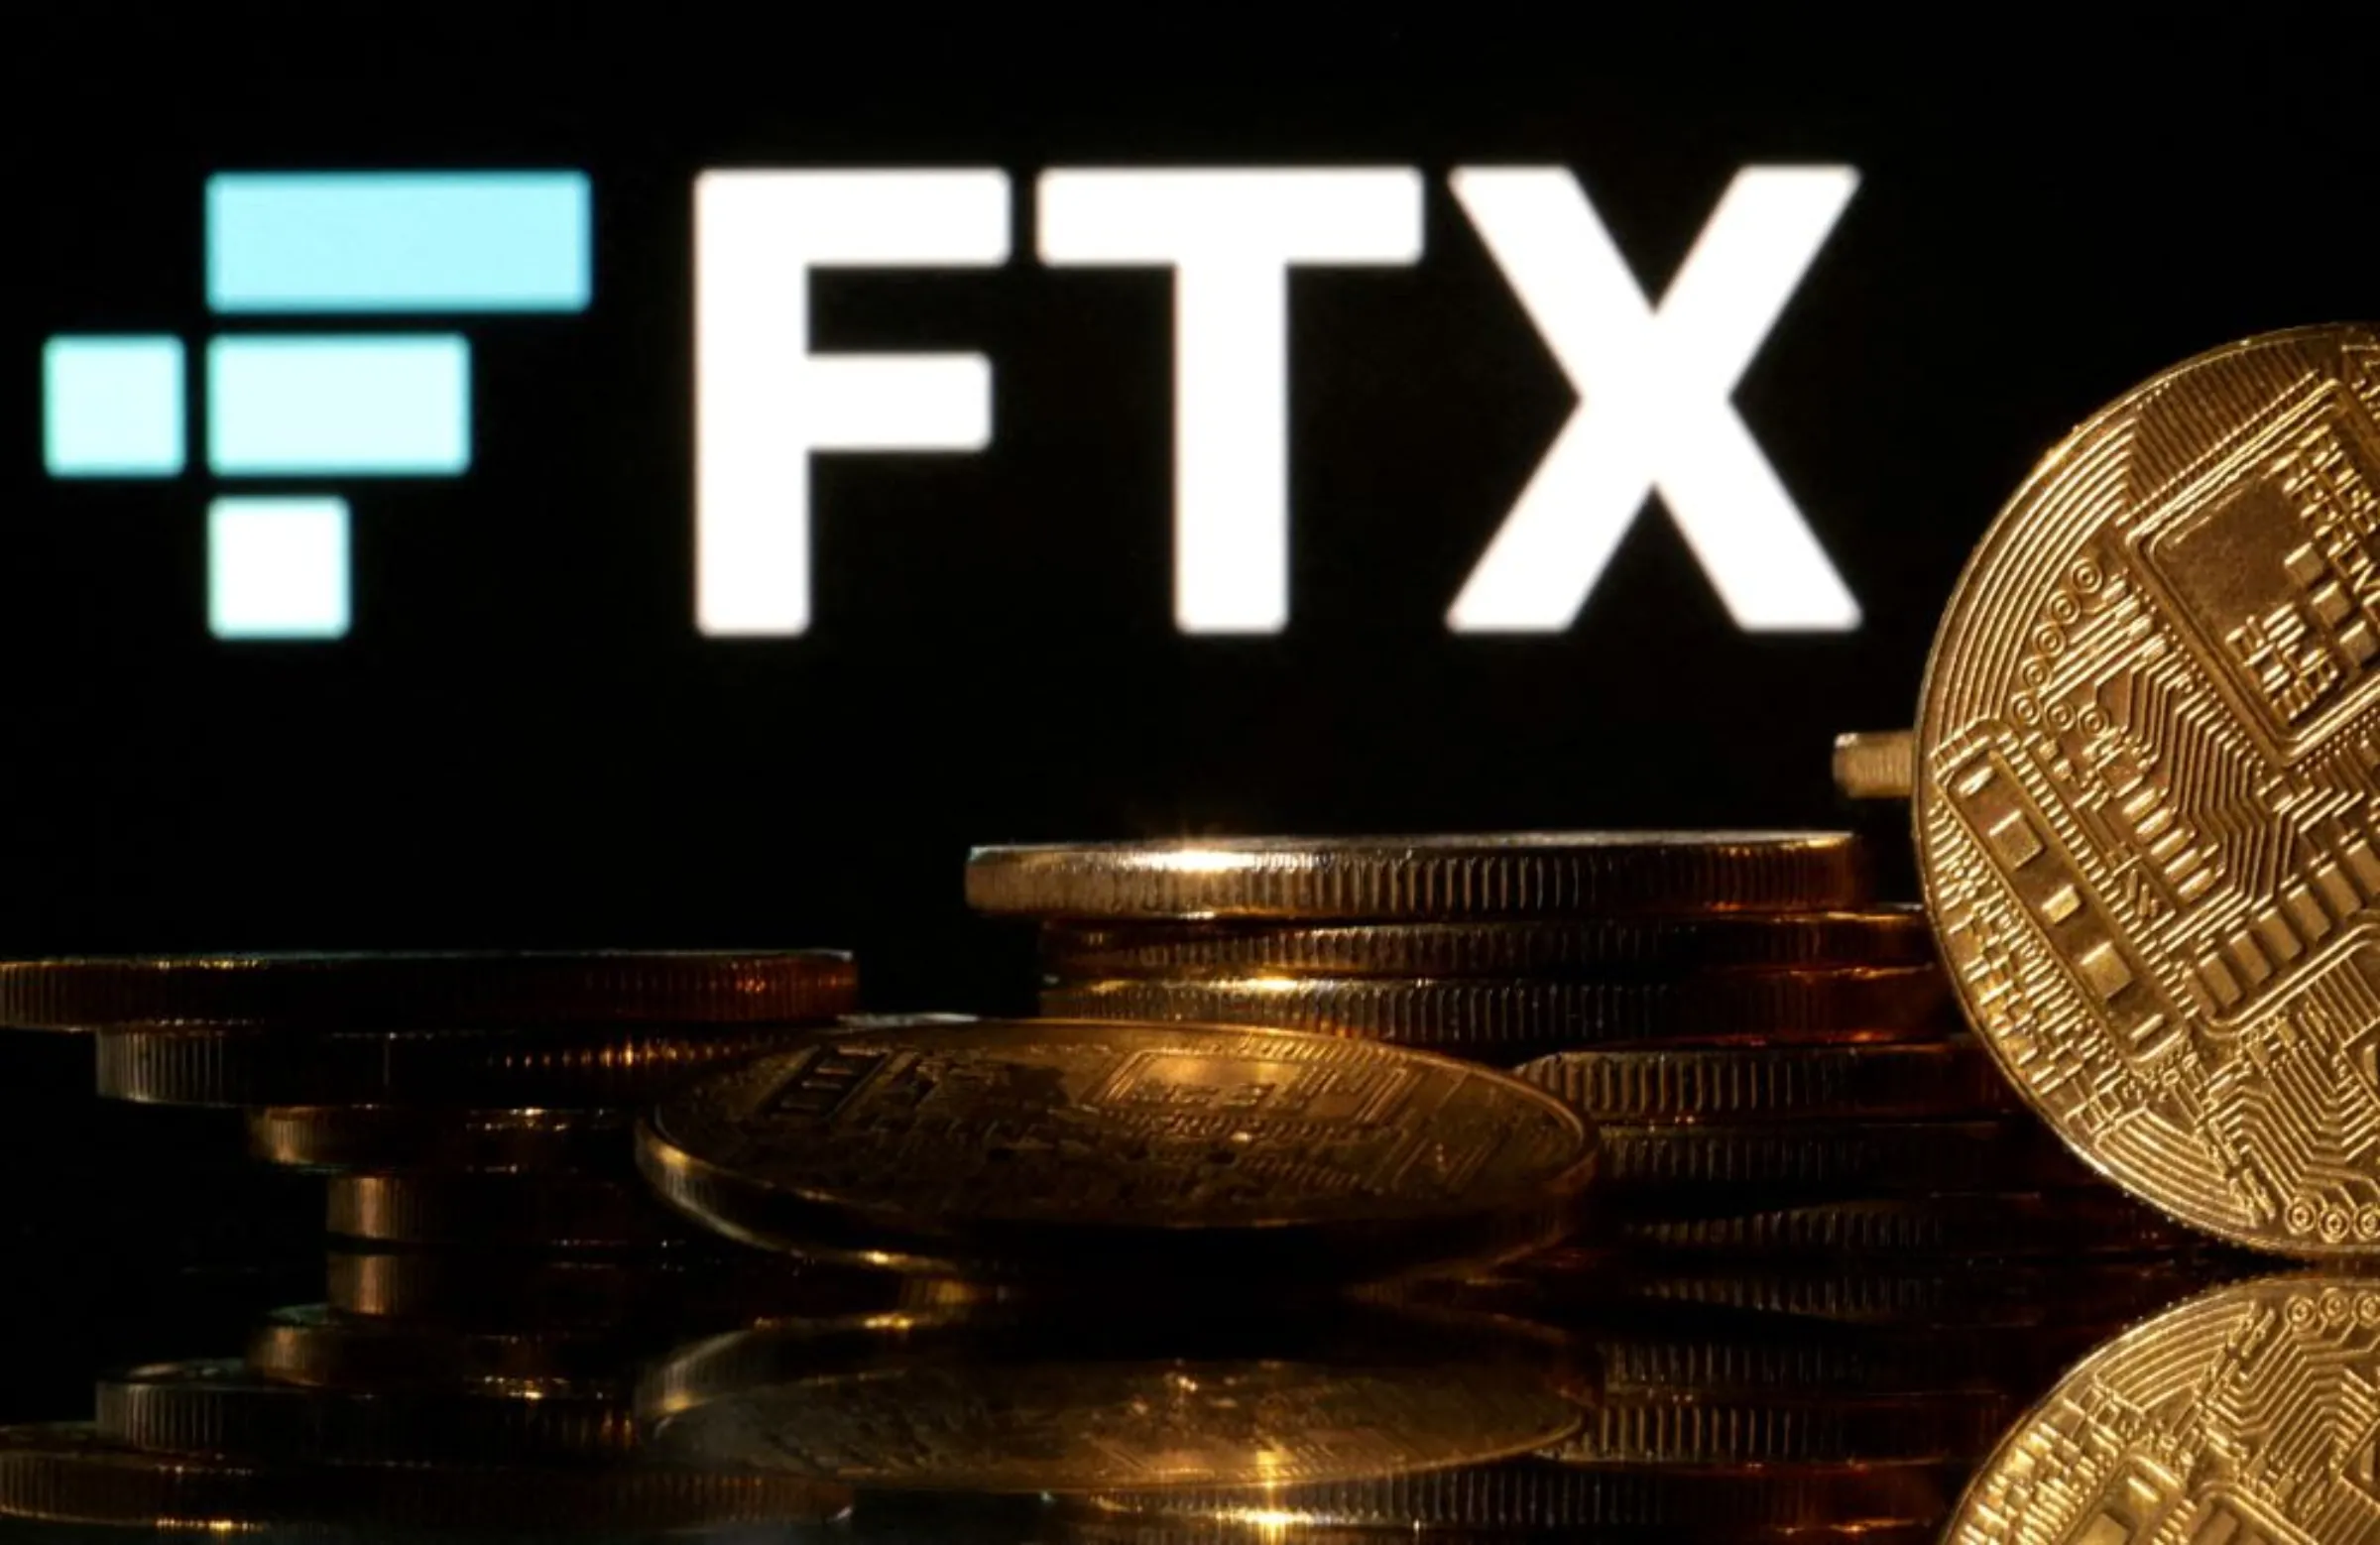 Representations of cryptocurrencies are seen in front of displayed FTX logo in this illustration taken November 10, 2022